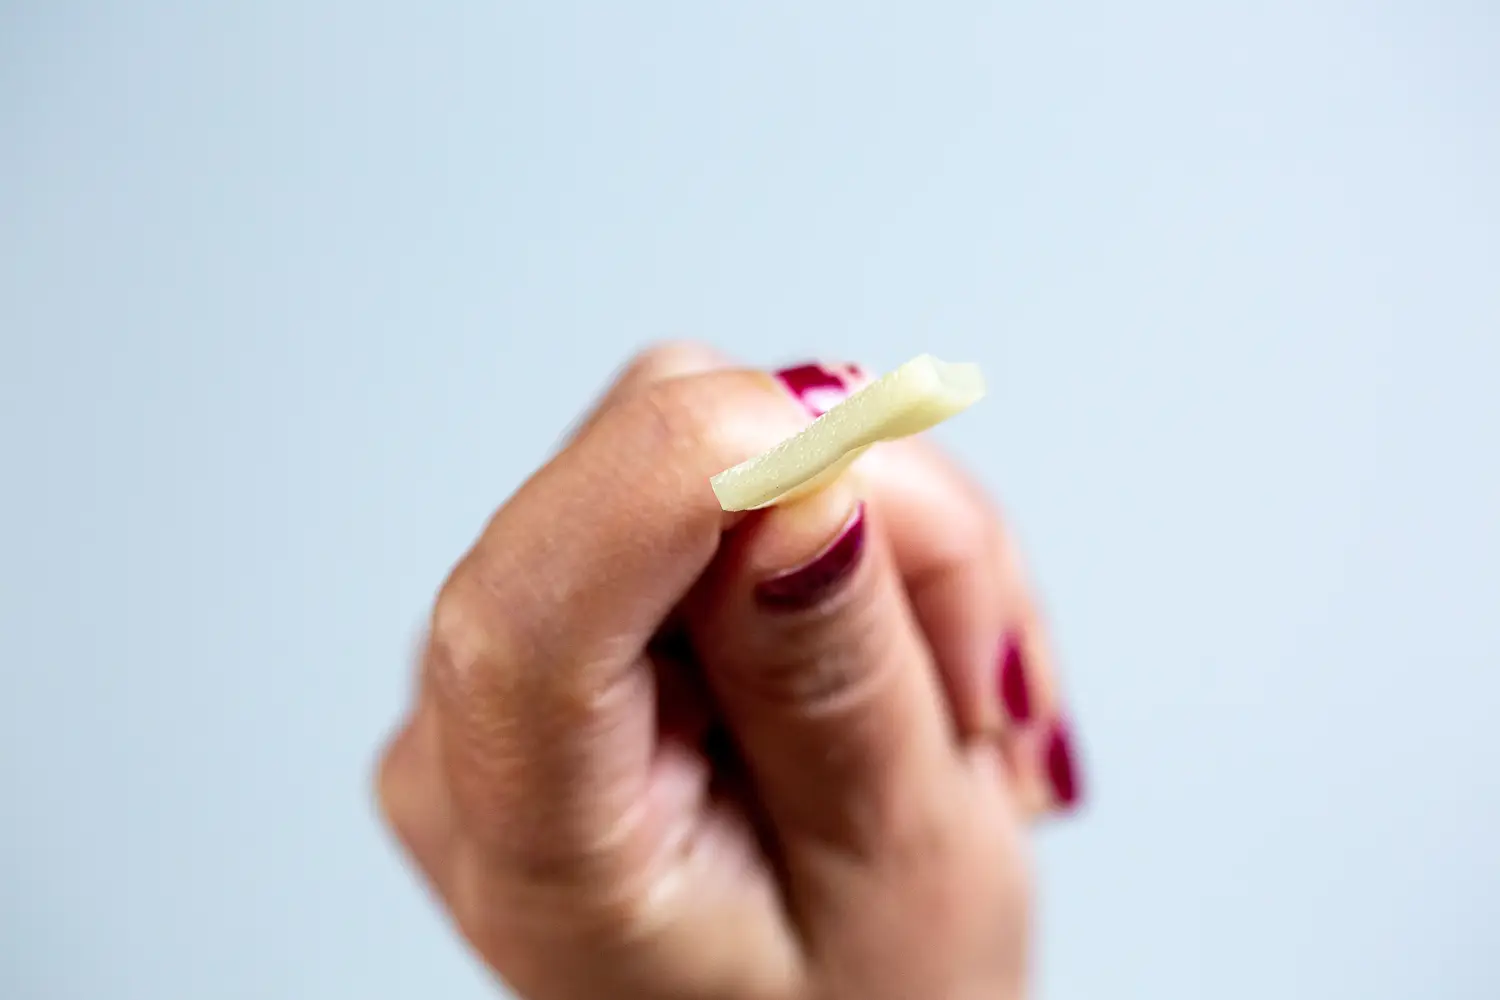 a hand holding a bite-sized piece of emmentaler cheese between thumb and forefinger to show how thin it is